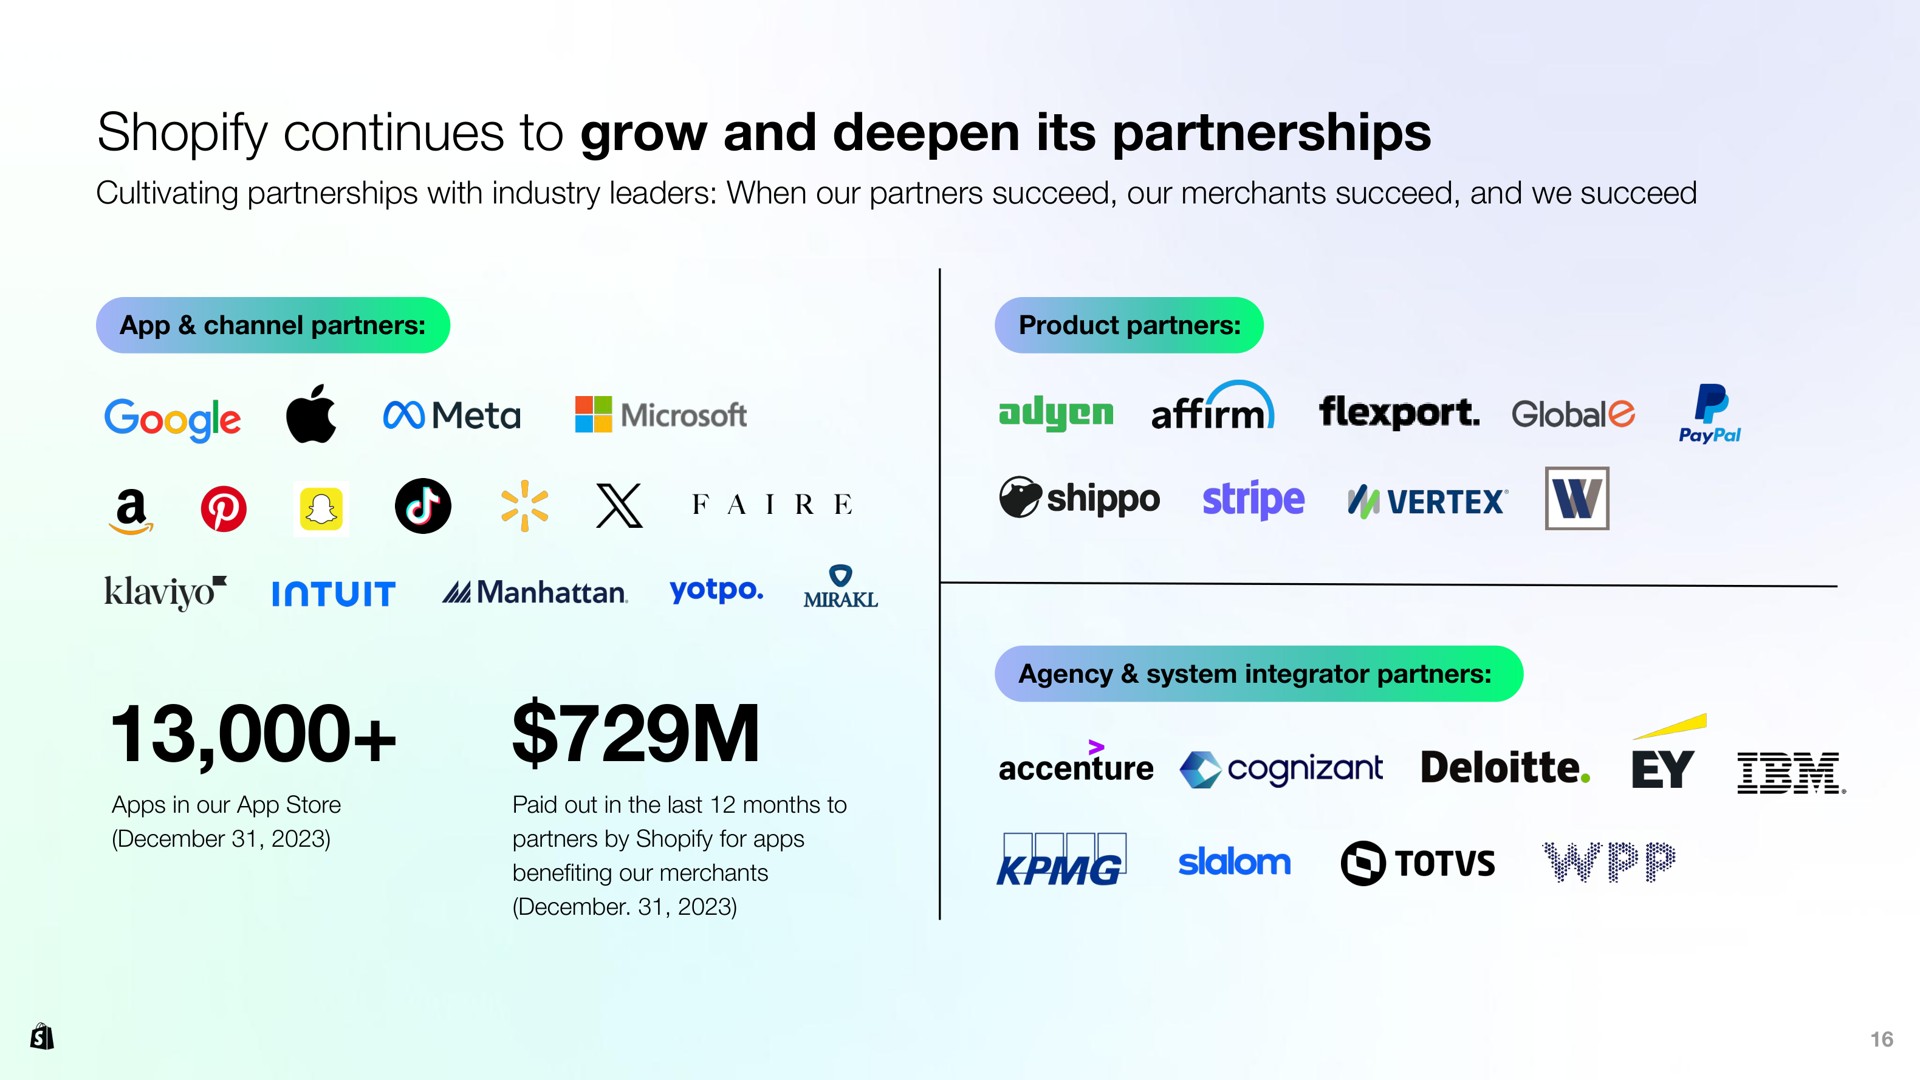 continues to grow and deepen its partnerships a shippo stripe vertex | Shopify